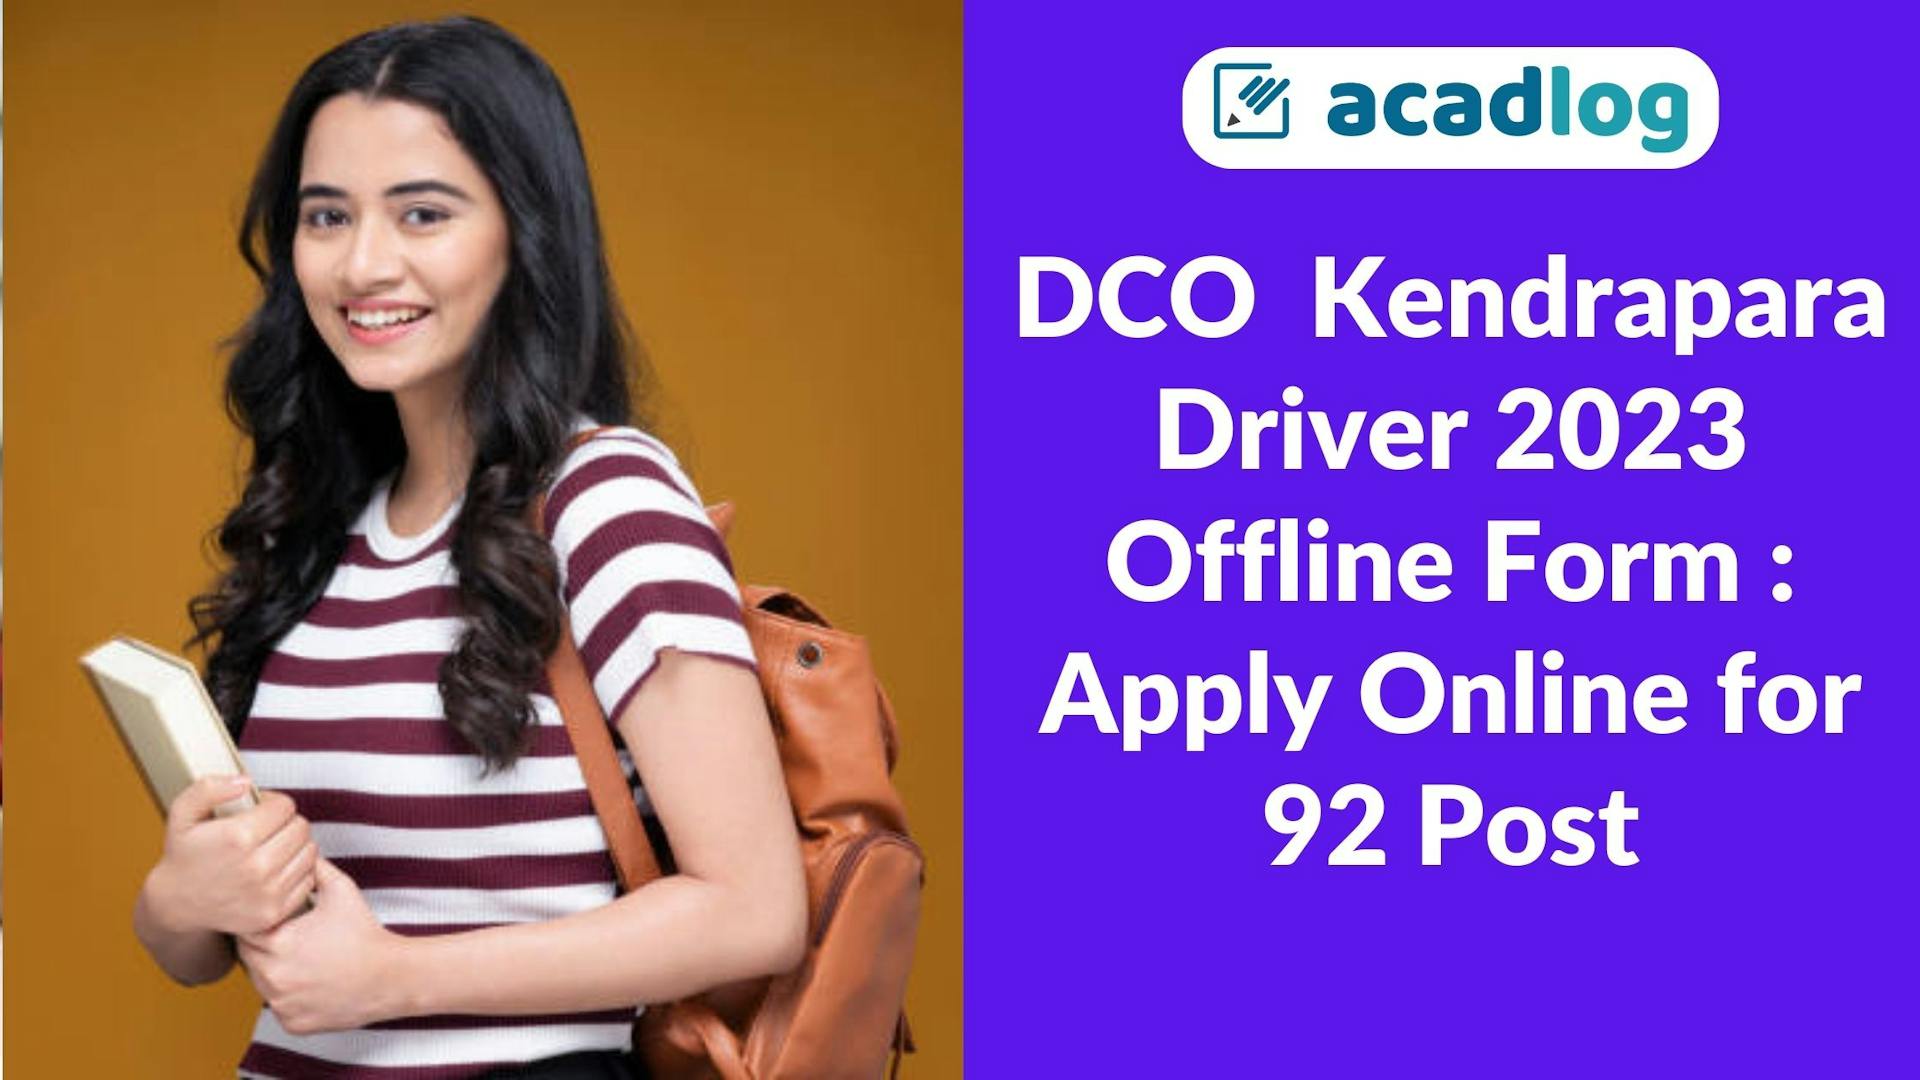 DCO  Kendrapara Driver 2023 Offline Form : Apply Online for 92 Post